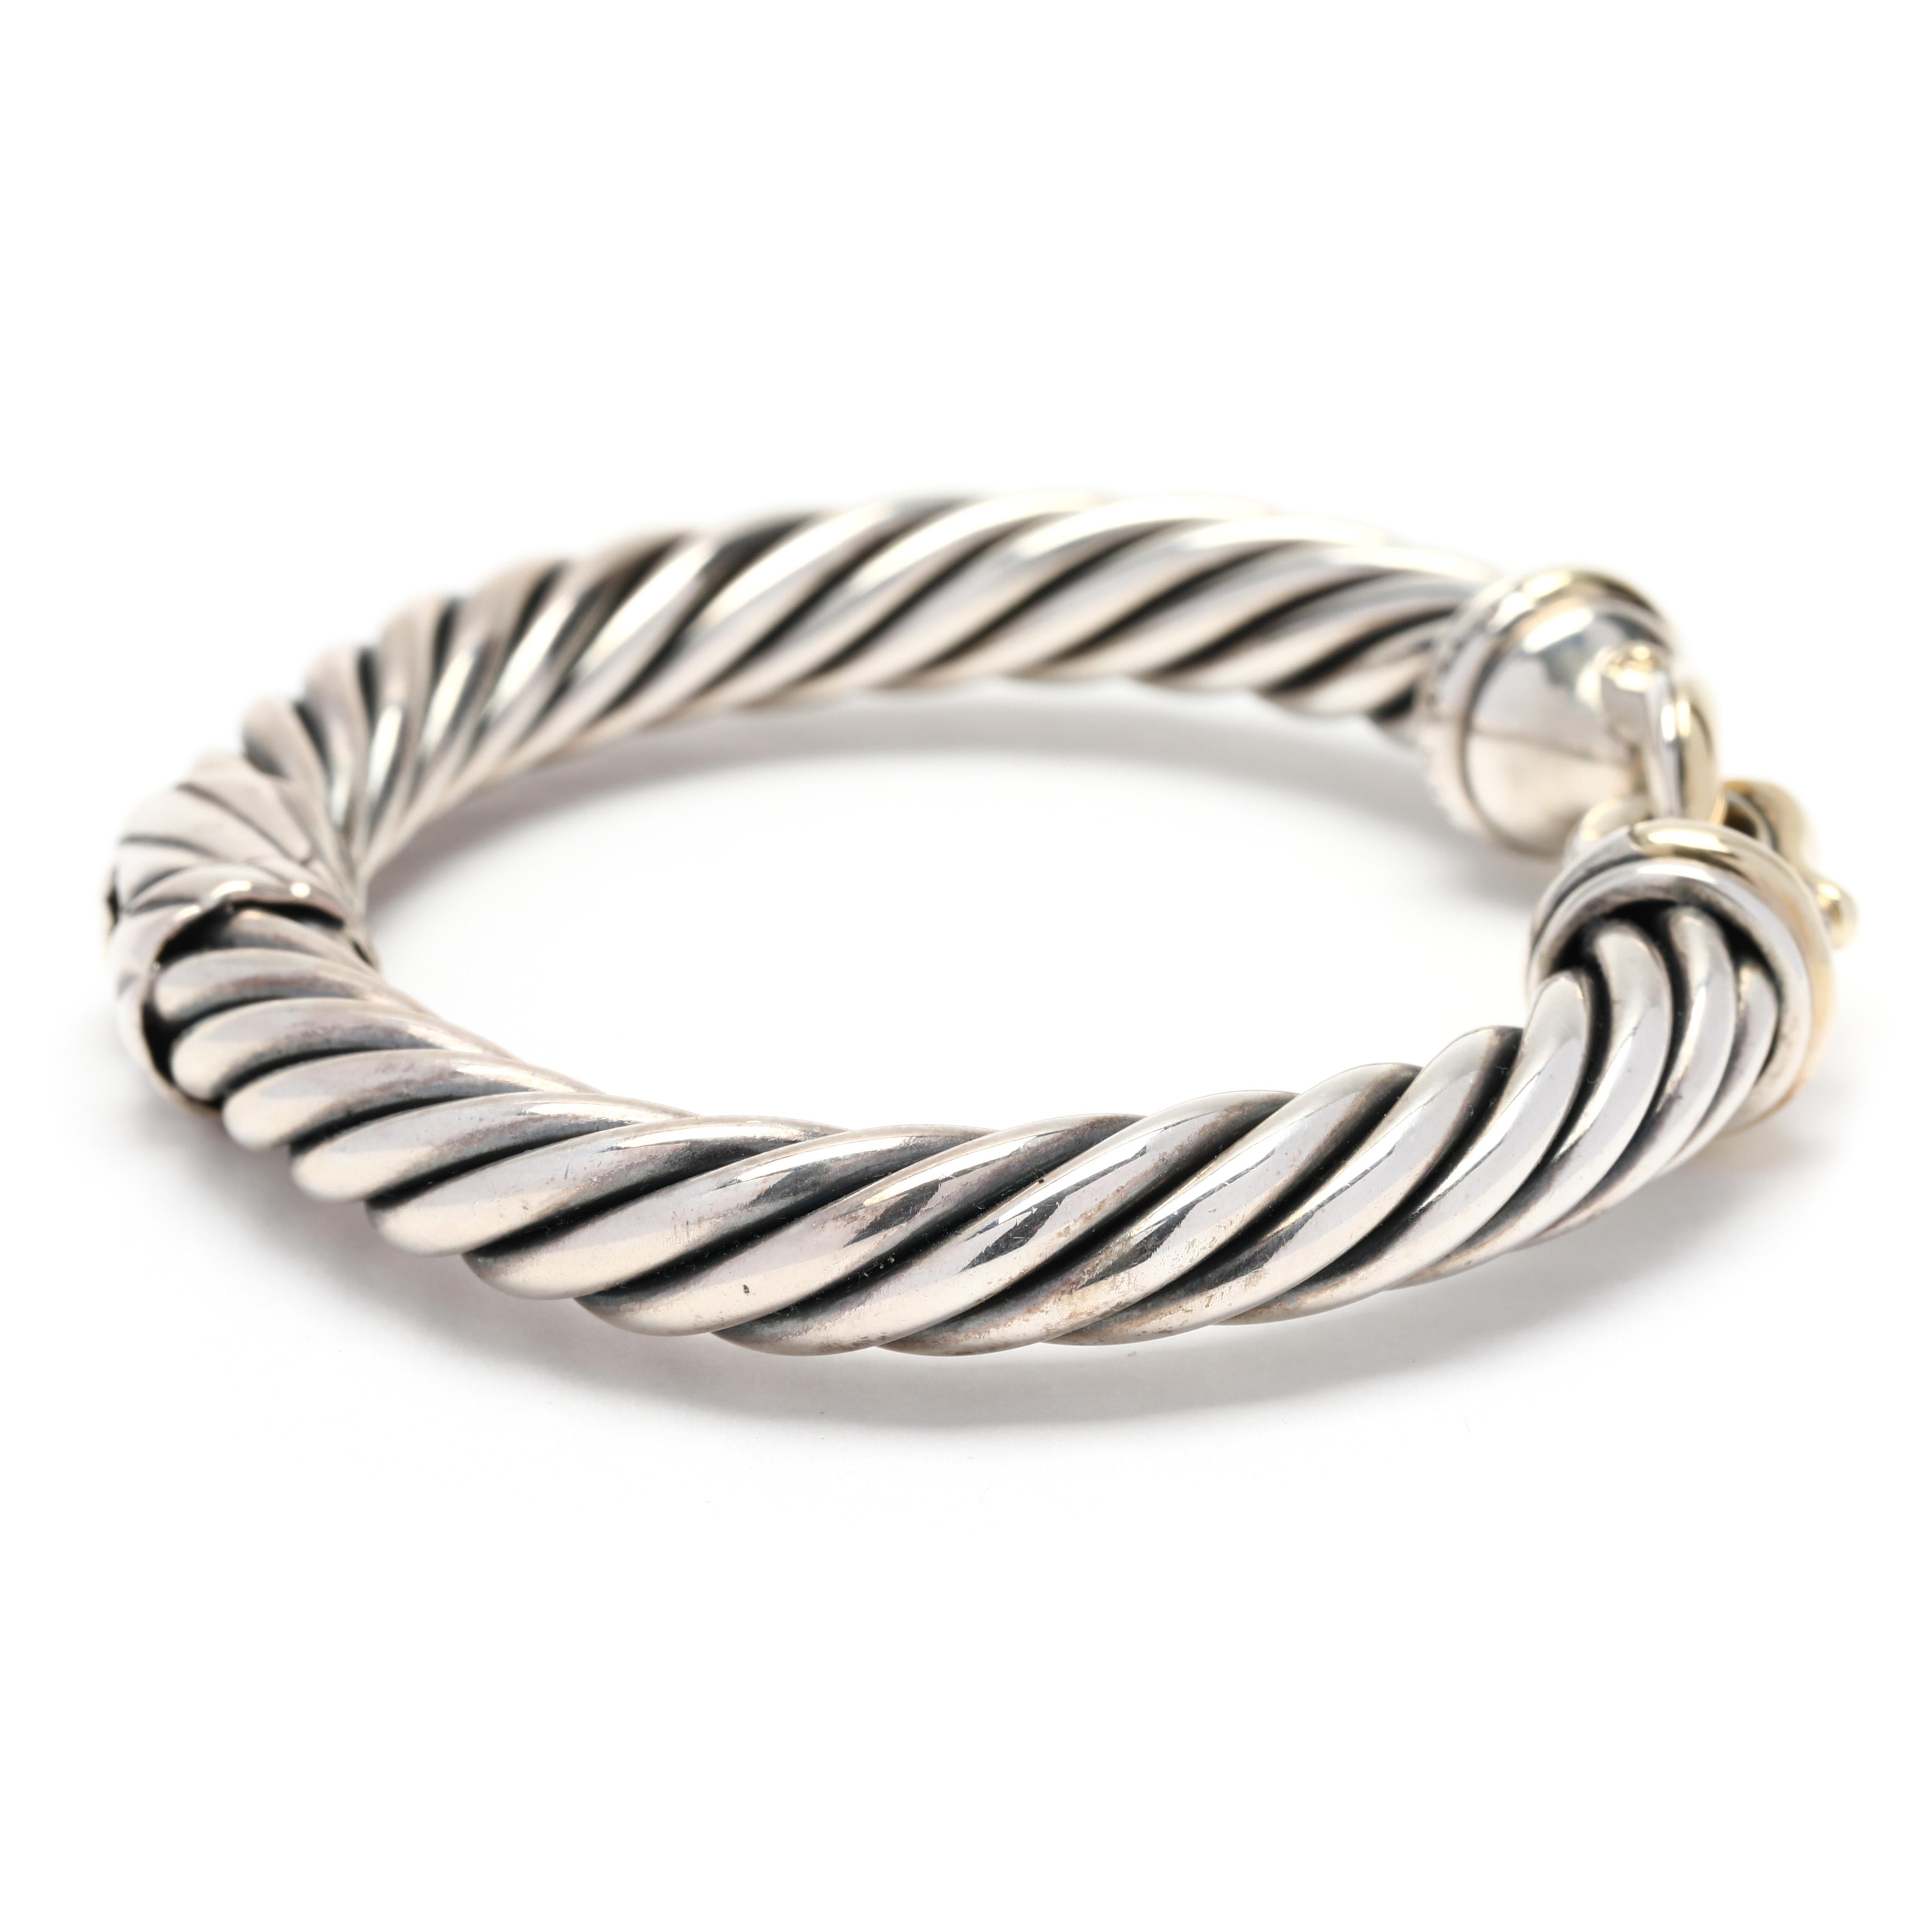 This stunning David Yurman Large Buckle Cable Bracelet is sculpted from 14K yellow gold and sterling silver. With its signature intricate cable design and exquisite buckle clasp, this bracelet adds a luxurious touch to any outfit. Its generous